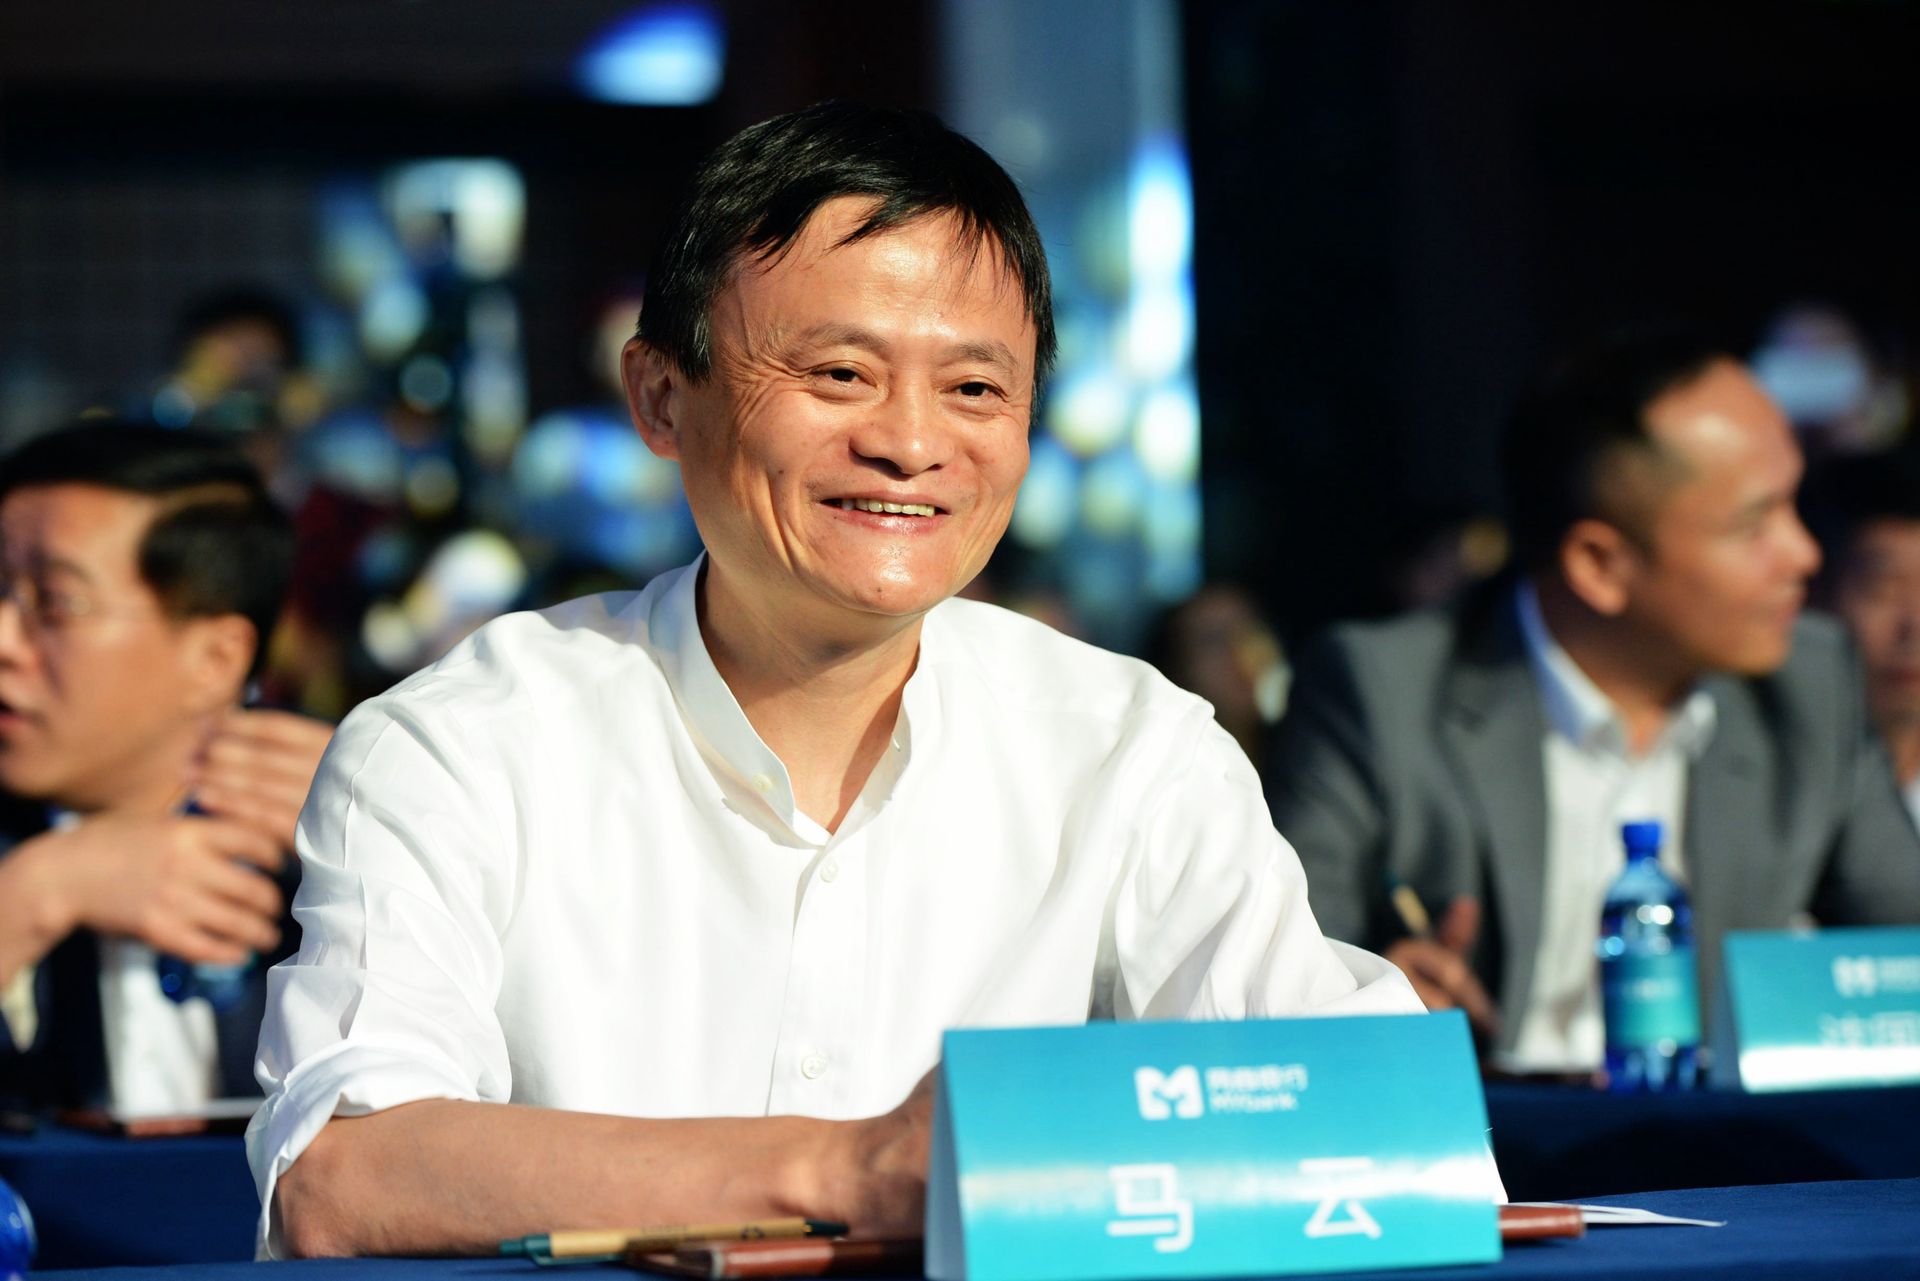 Jack Ma: the founder of Alibaba